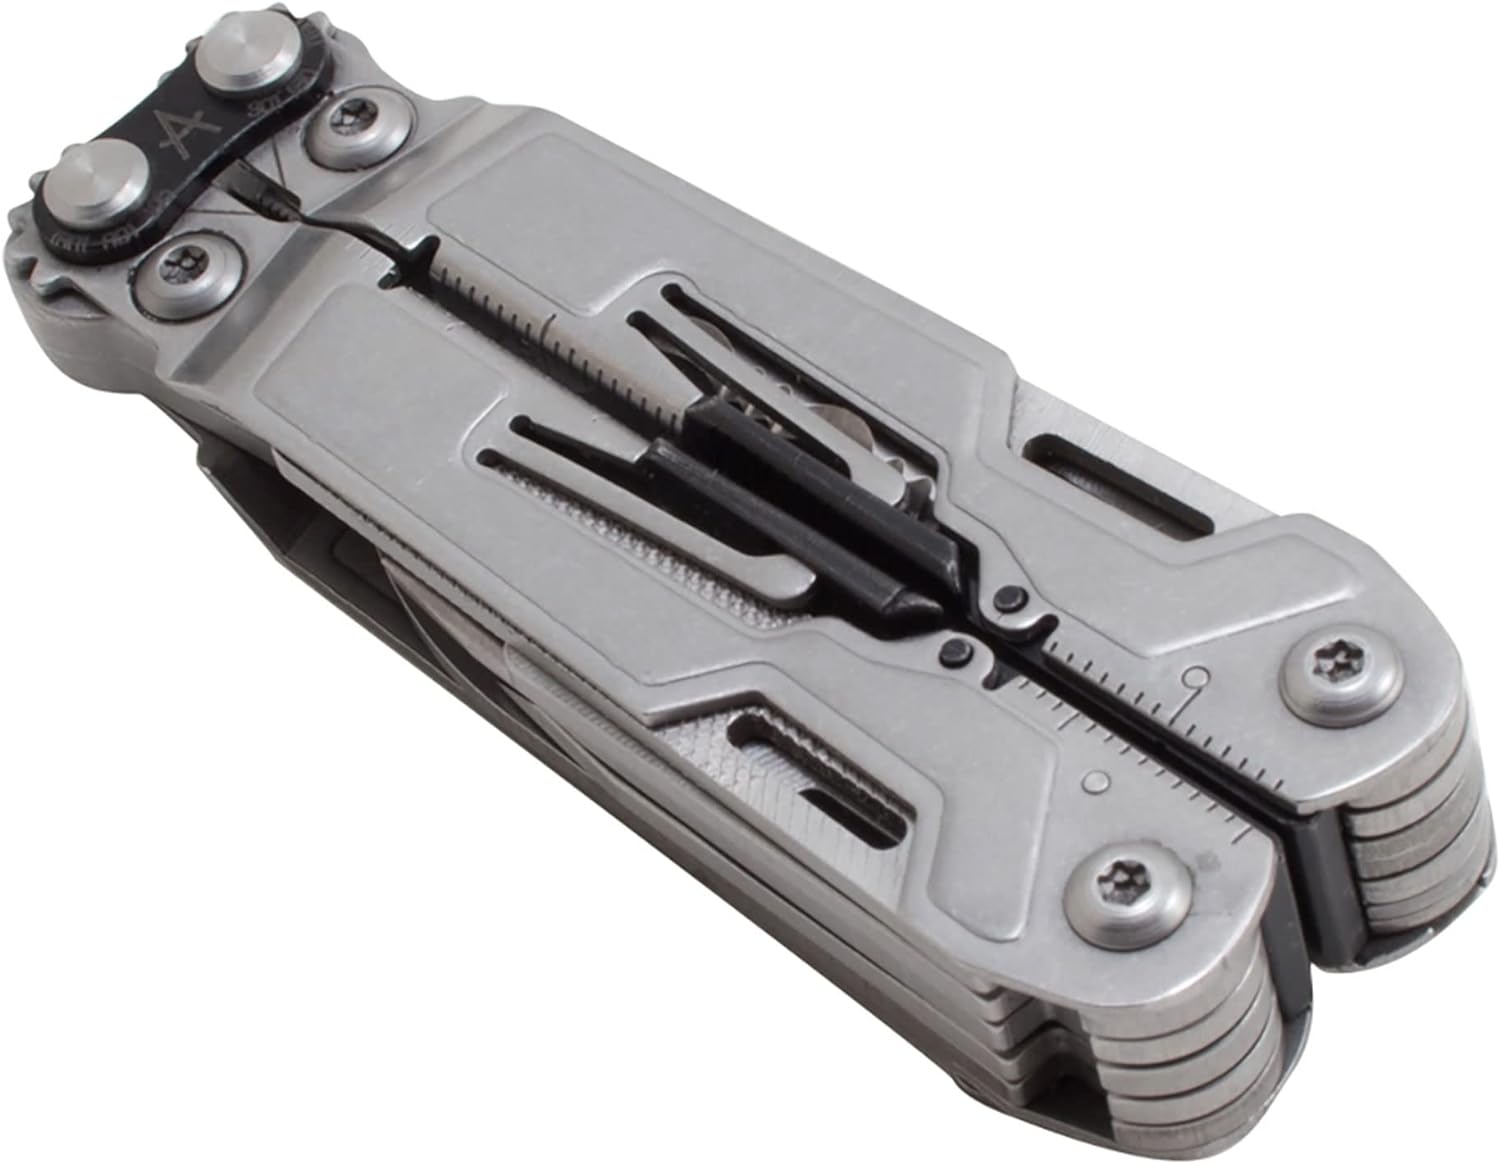 SOG PowerPint Mini Compact Stainless Steel Multi-Tool with 18 Lightweight Tools